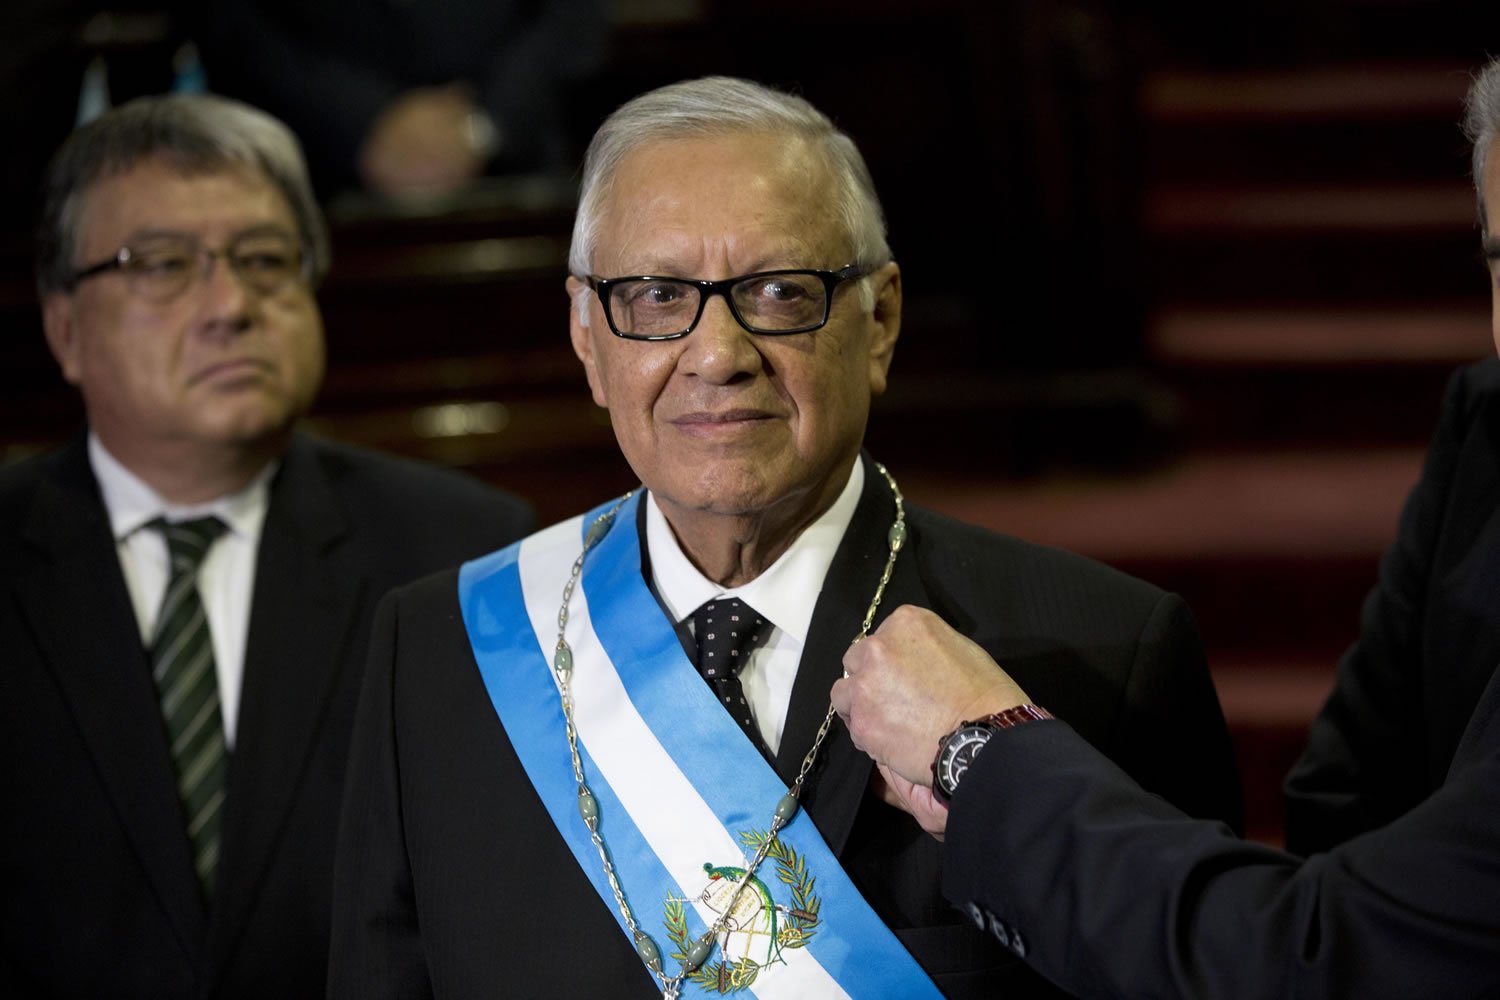 Guatemala's President Alejandro Maldonado stands still as Congress President Luis Rabbe pins on Maldonado's coat jacket the presidential pin, during the impromptu presidential swearing-in ceremony before Congress in Guatemala City, Thursday, Sept. 3, 2015. Maldonado was sworn in amid a corruption scandal that has caused a national political crisis. The conservative former judge will serve out the term of ex-President Otto Perez Molina, who resigned late Wednesday after a judge issued an order for his detention.